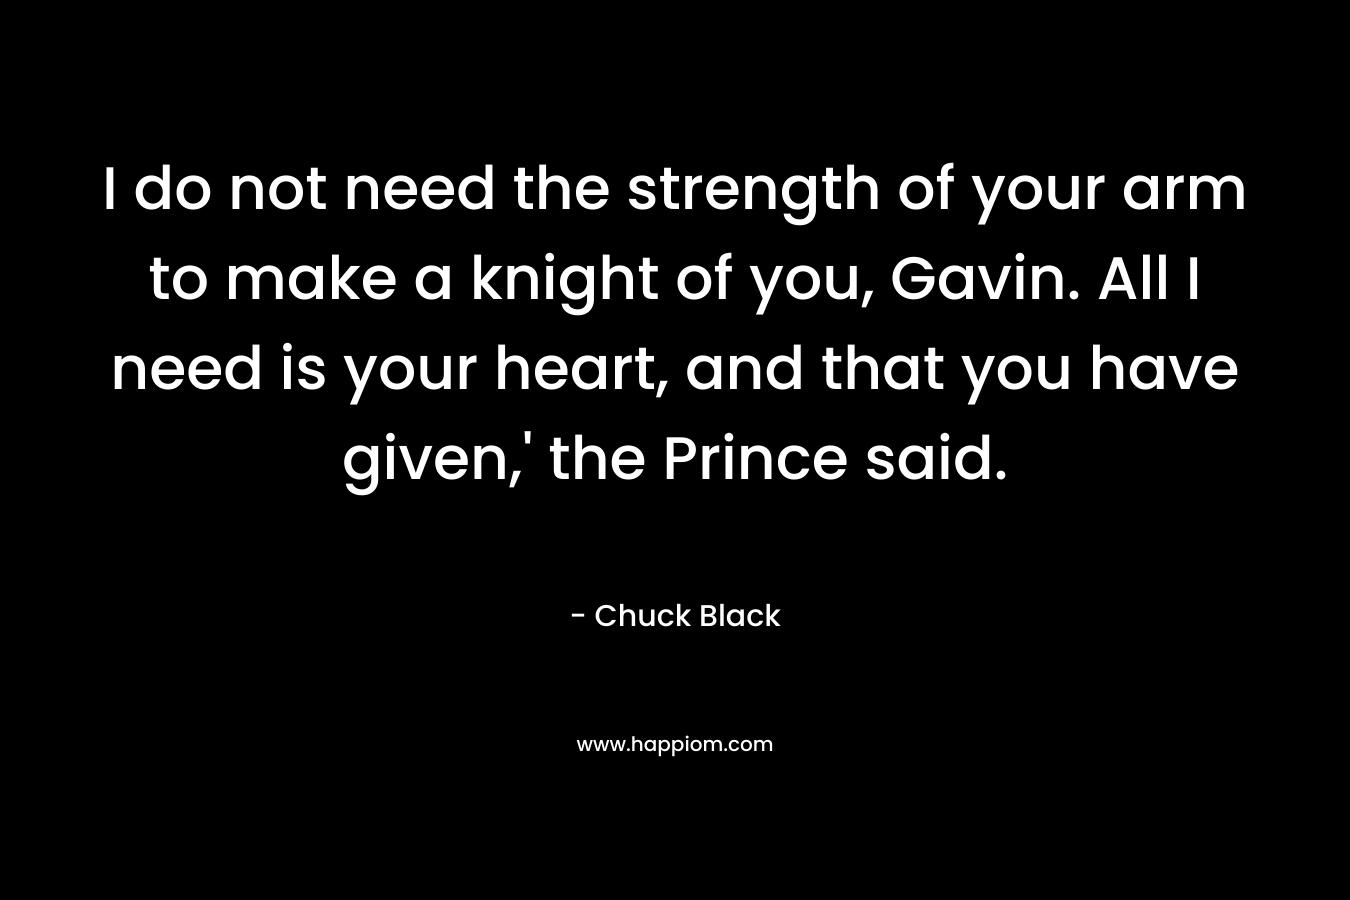 I do not need the strength of your arm to make a knight of you, Gavin. All I need is your heart, and that you have given,’ the Prince said. – Chuck Black